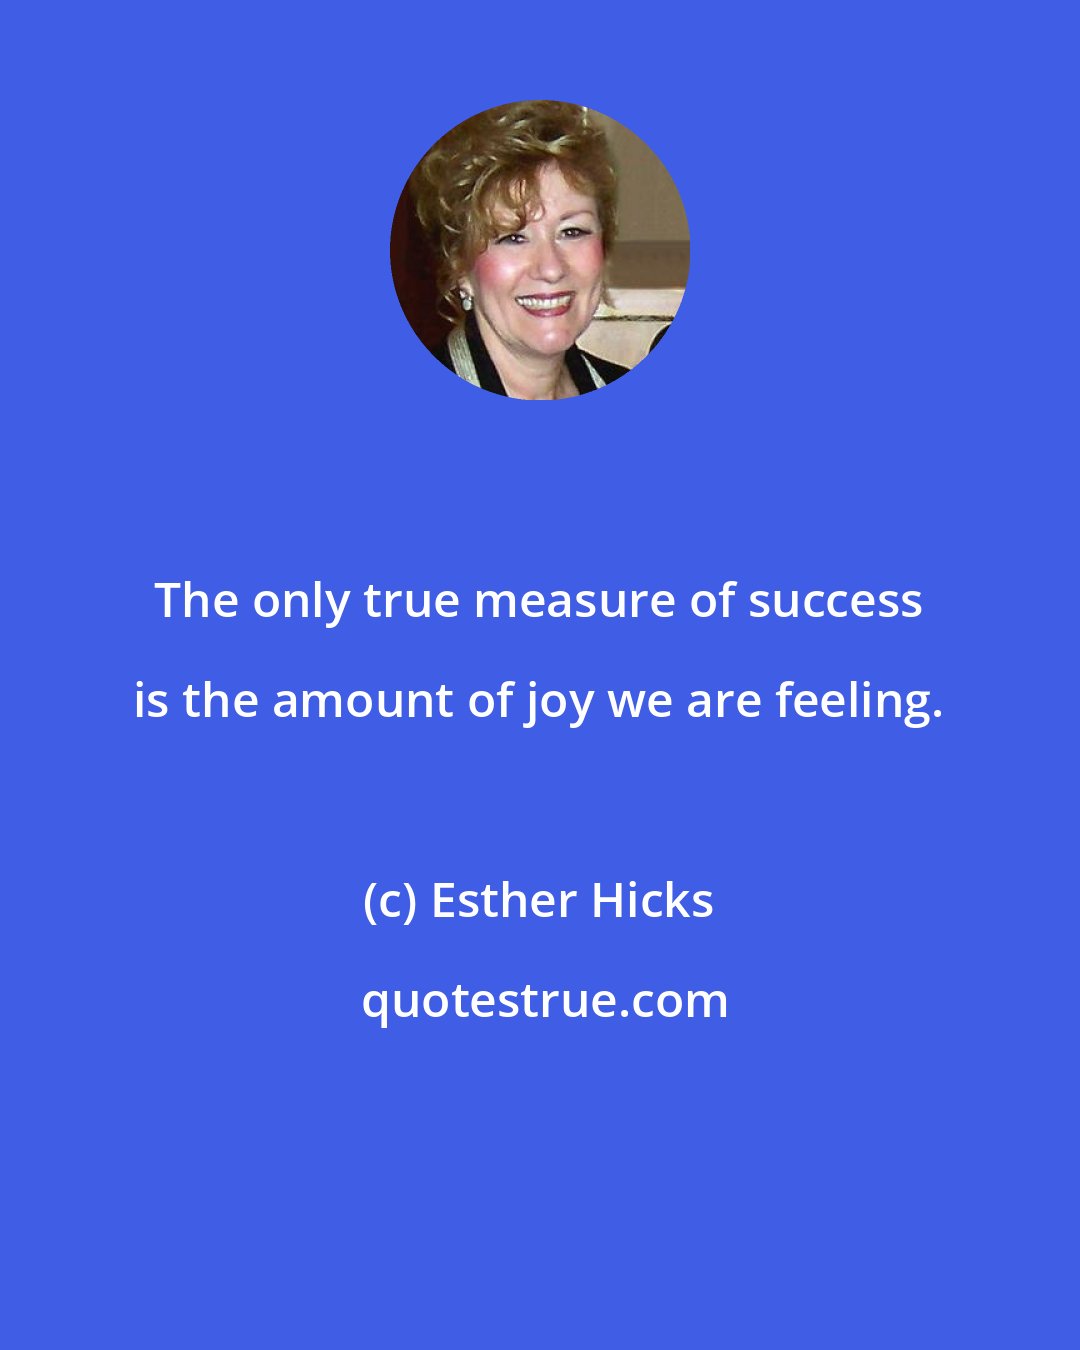 Esther Hicks: The only true measure of success is the amount of joy we are feeling.